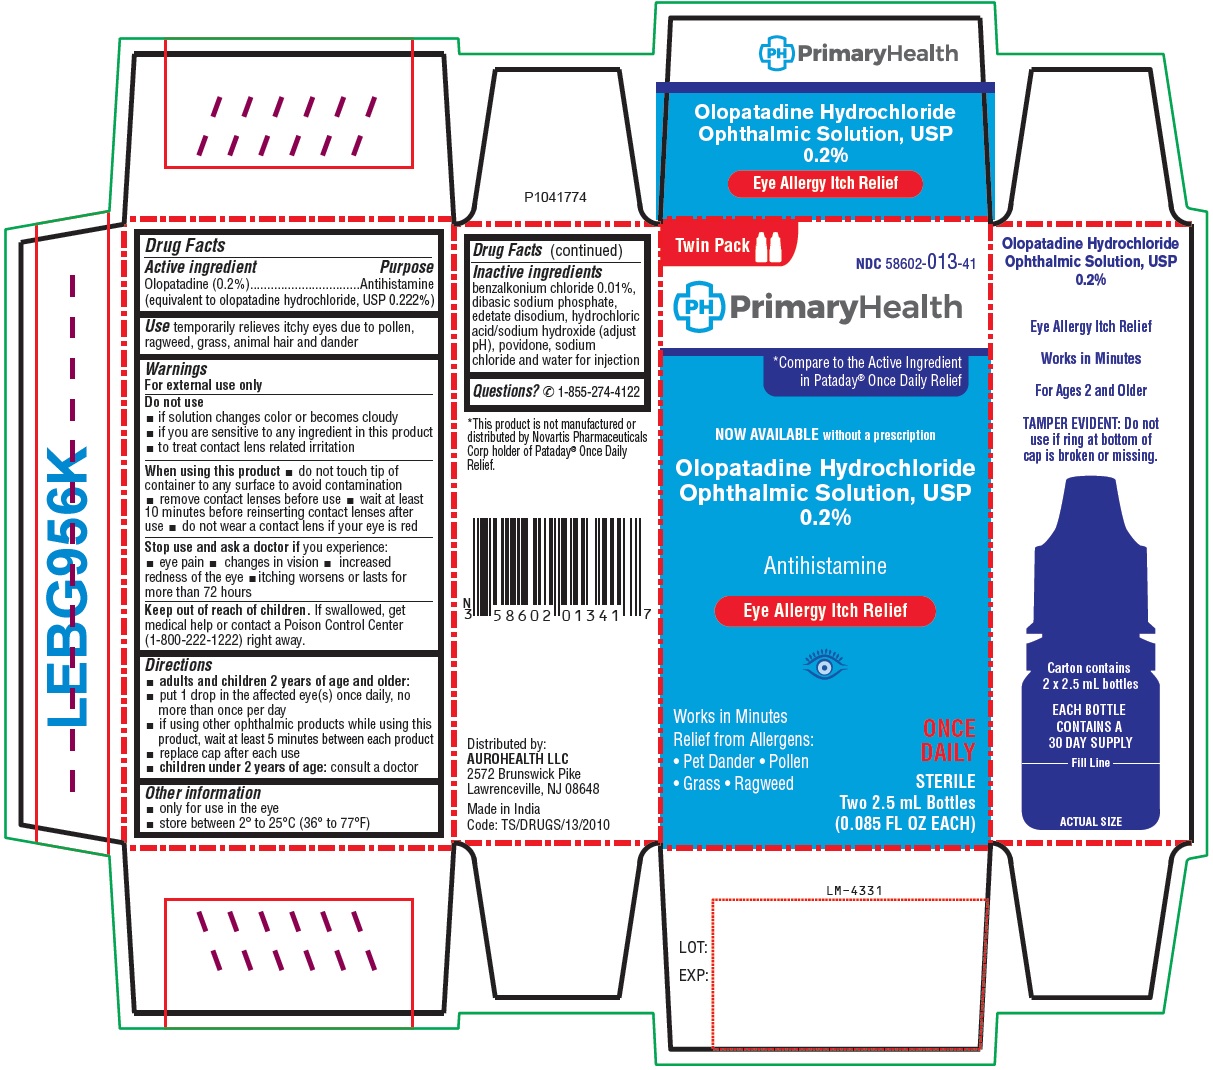 PACKAGE LABEL-PRINCIPAL DISPLAY PANEL-0.2% (2.5 mL Container Carton) Twin Pack